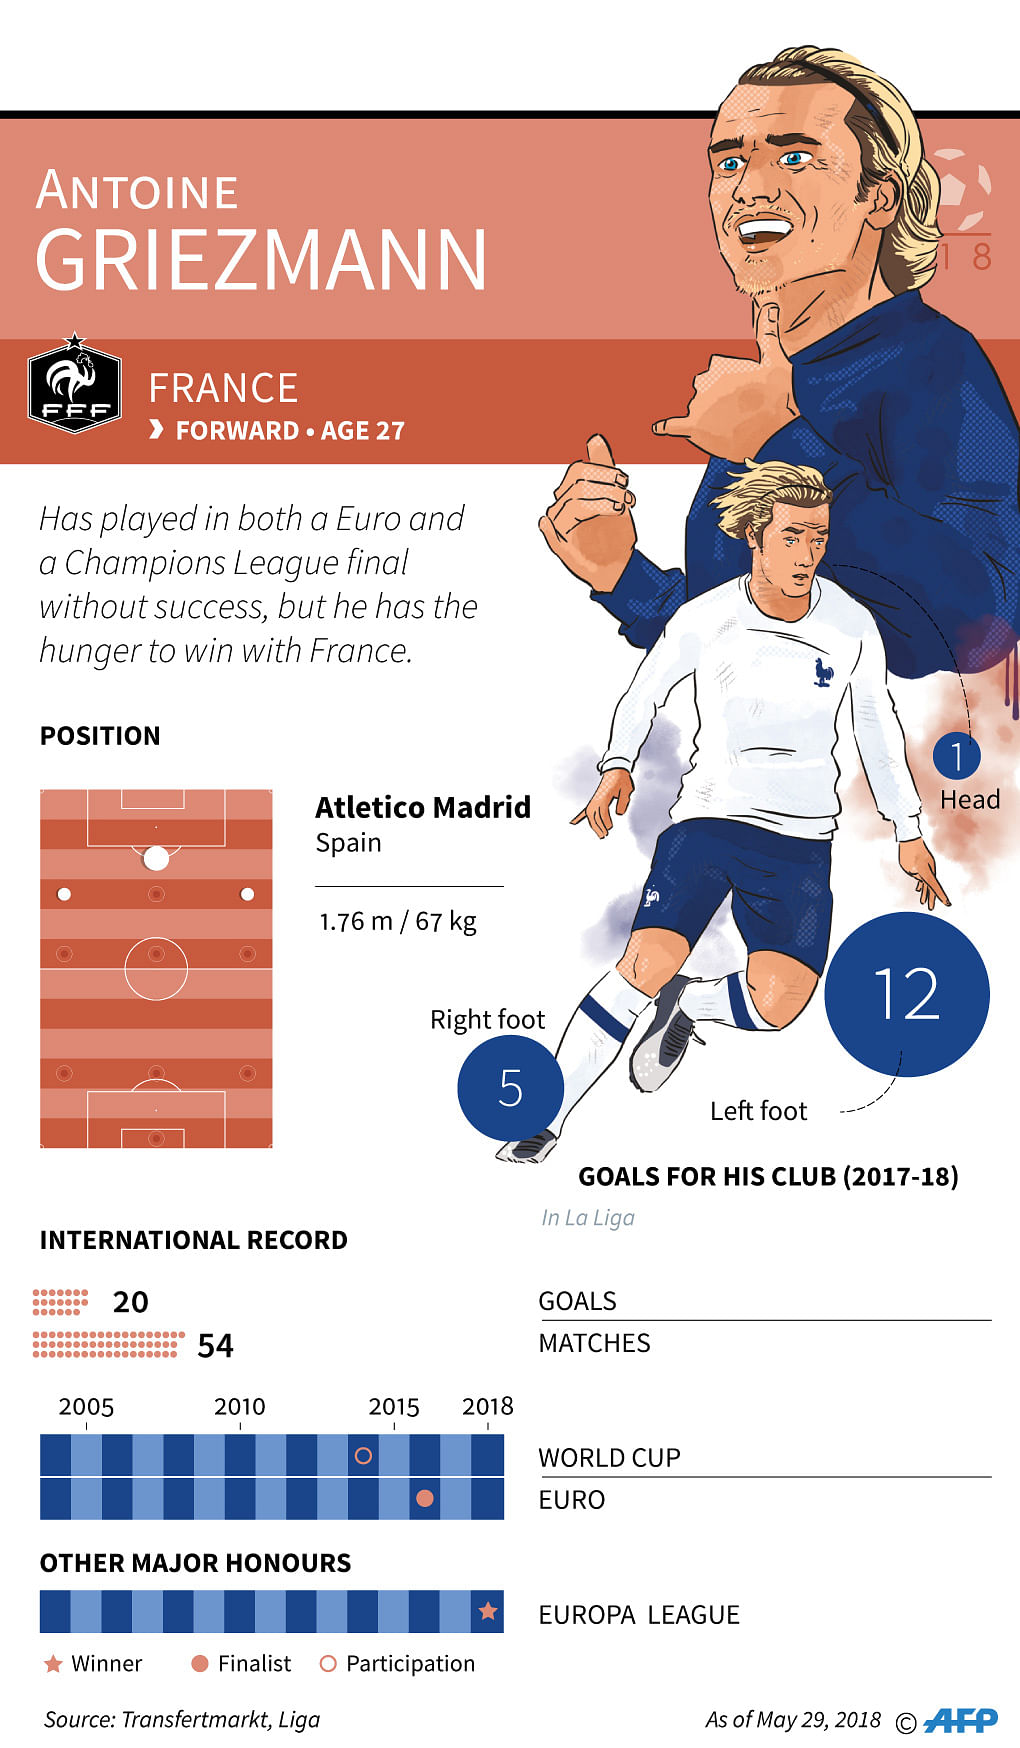 Facts and stats on French star Antoine Griezmann ahead of the 2018 World Cup in Russia. Photo: AFP